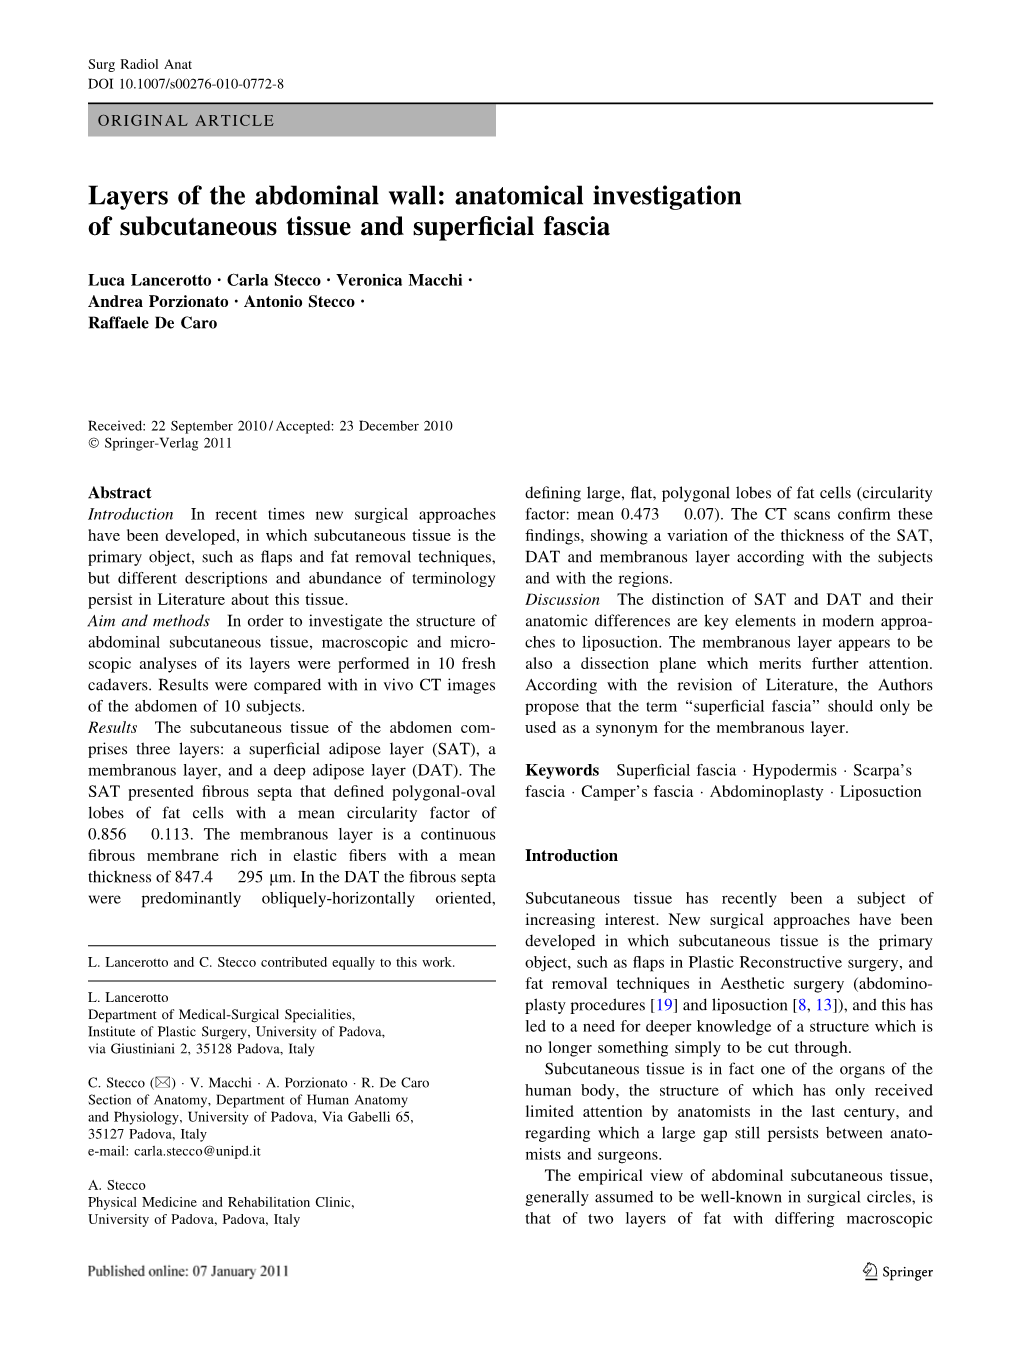 Anatomical Investigation of Subcutaneous Tissue and Superficial